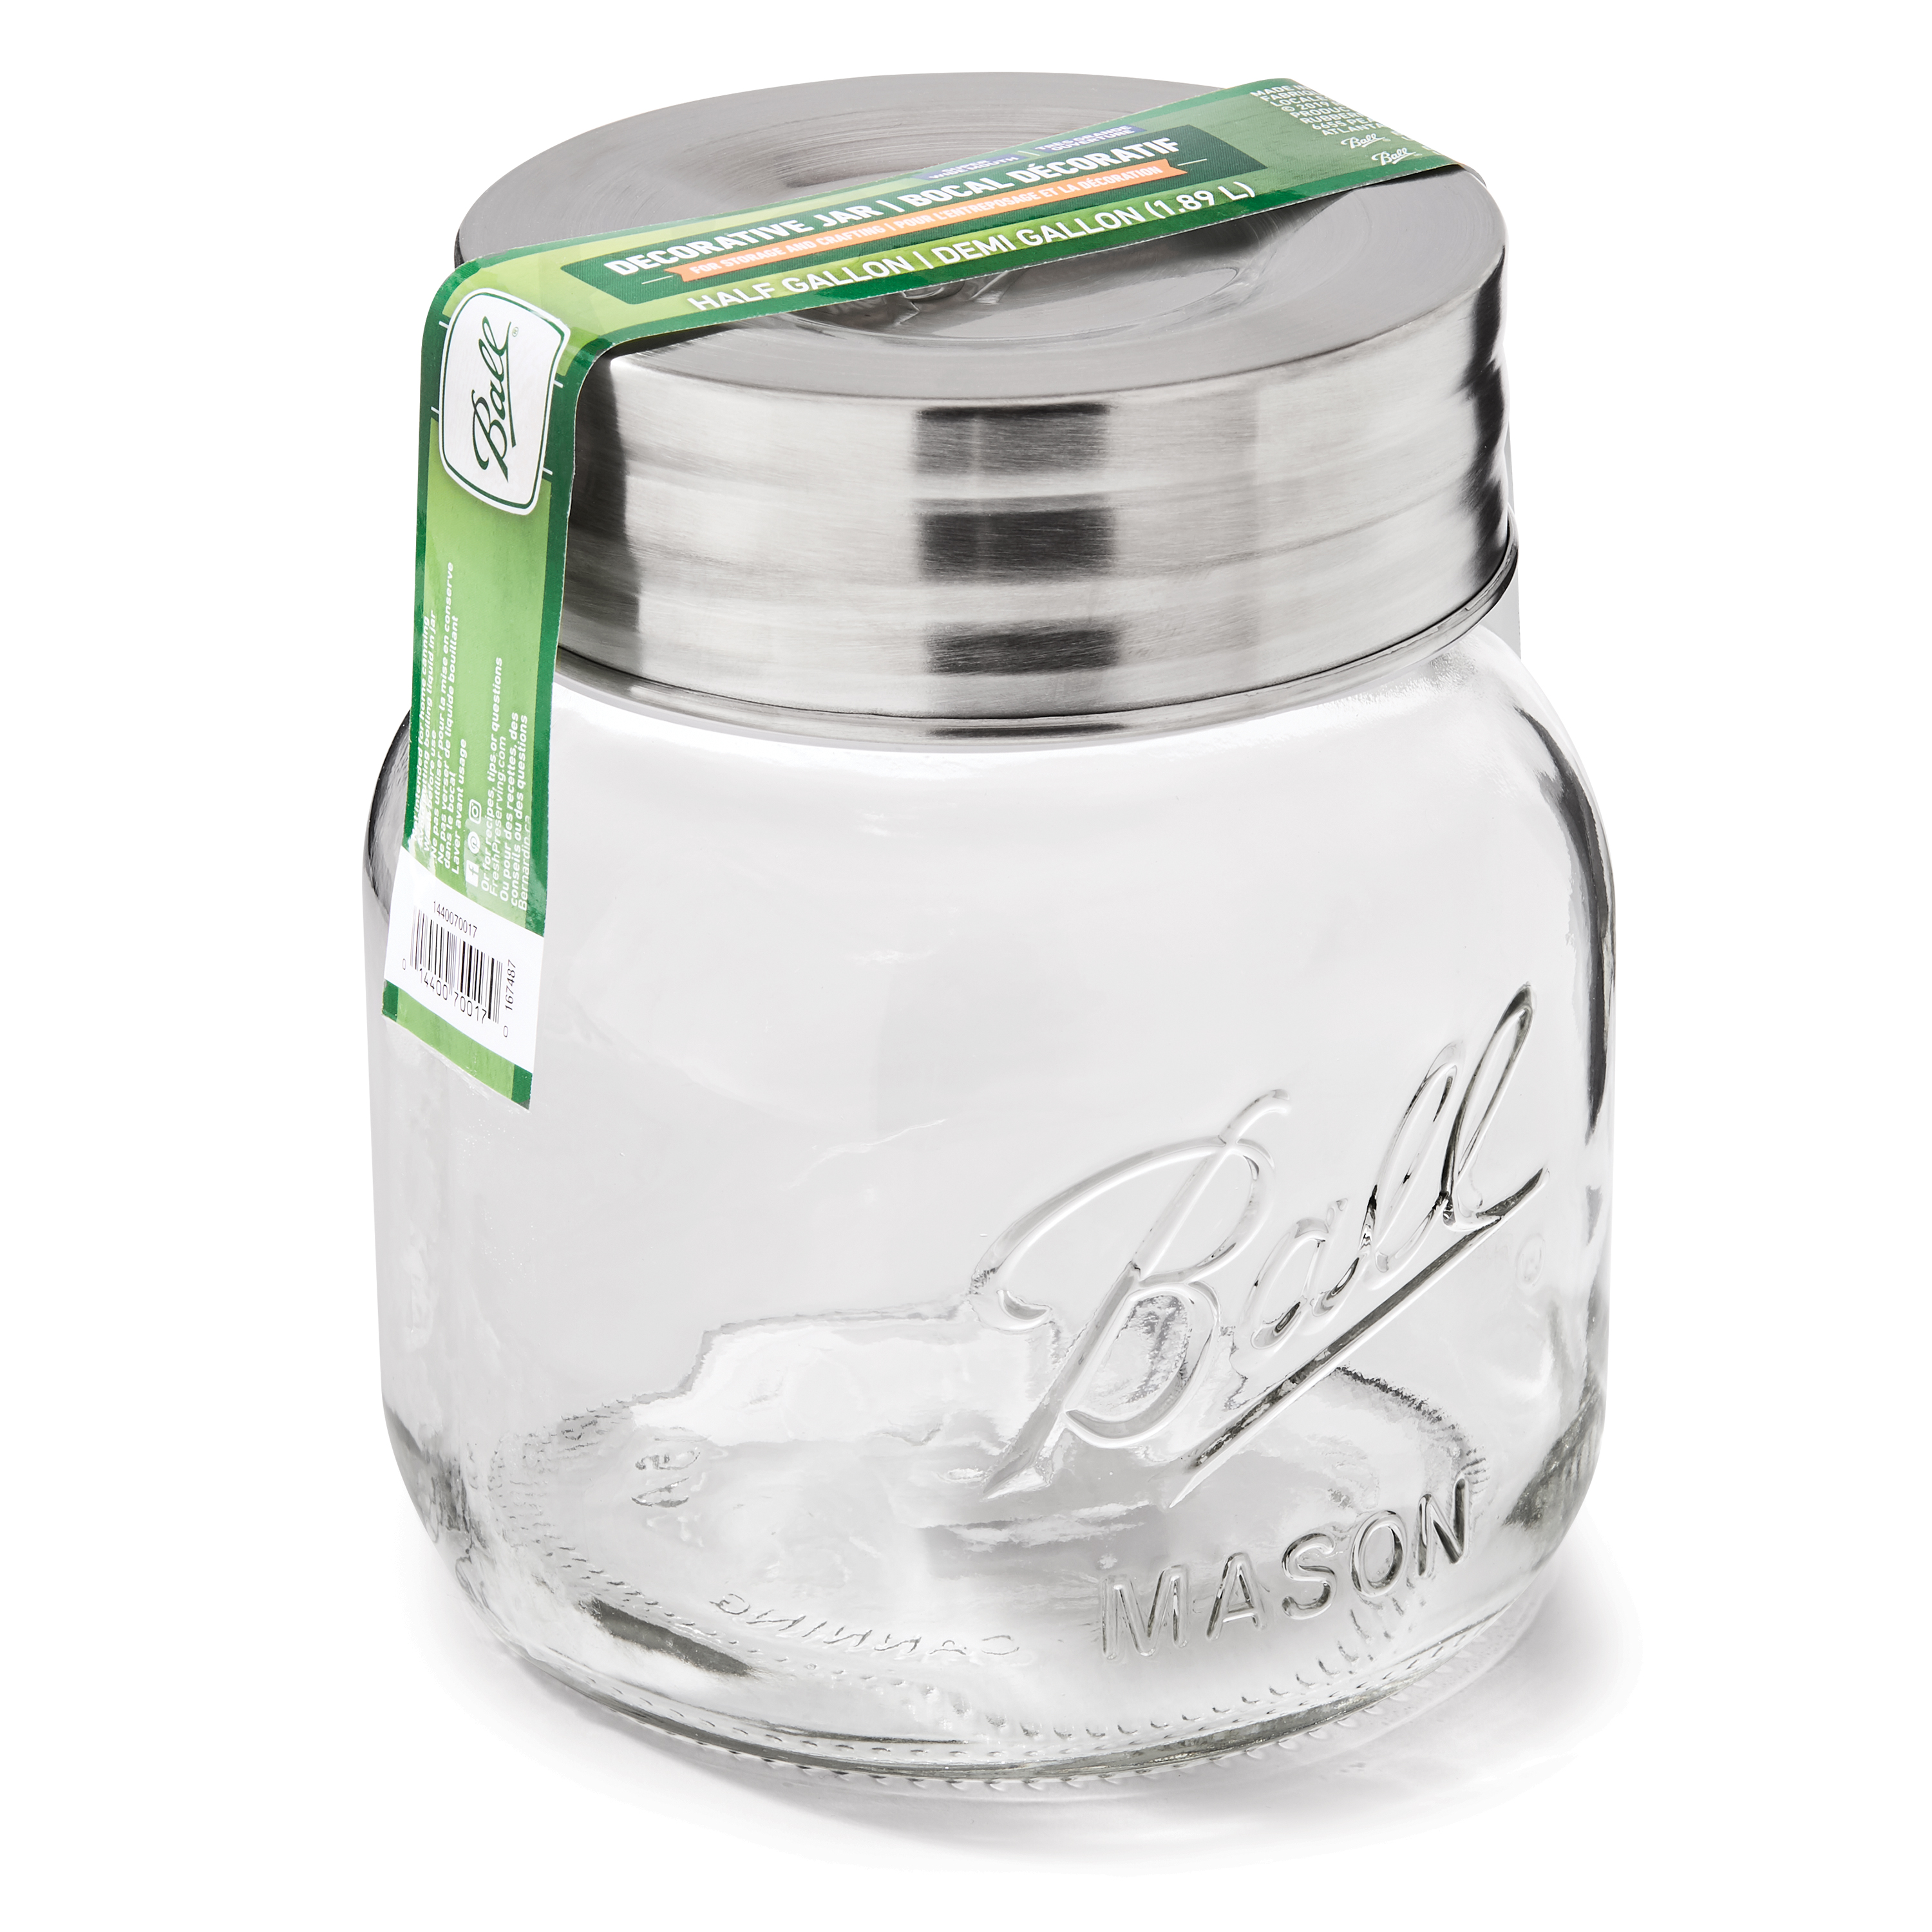 Ball® Extra Wide Half-Gallon Decorative Mason Jar with Metal Lid, Clear, 64 Ounces - image 2 of 5